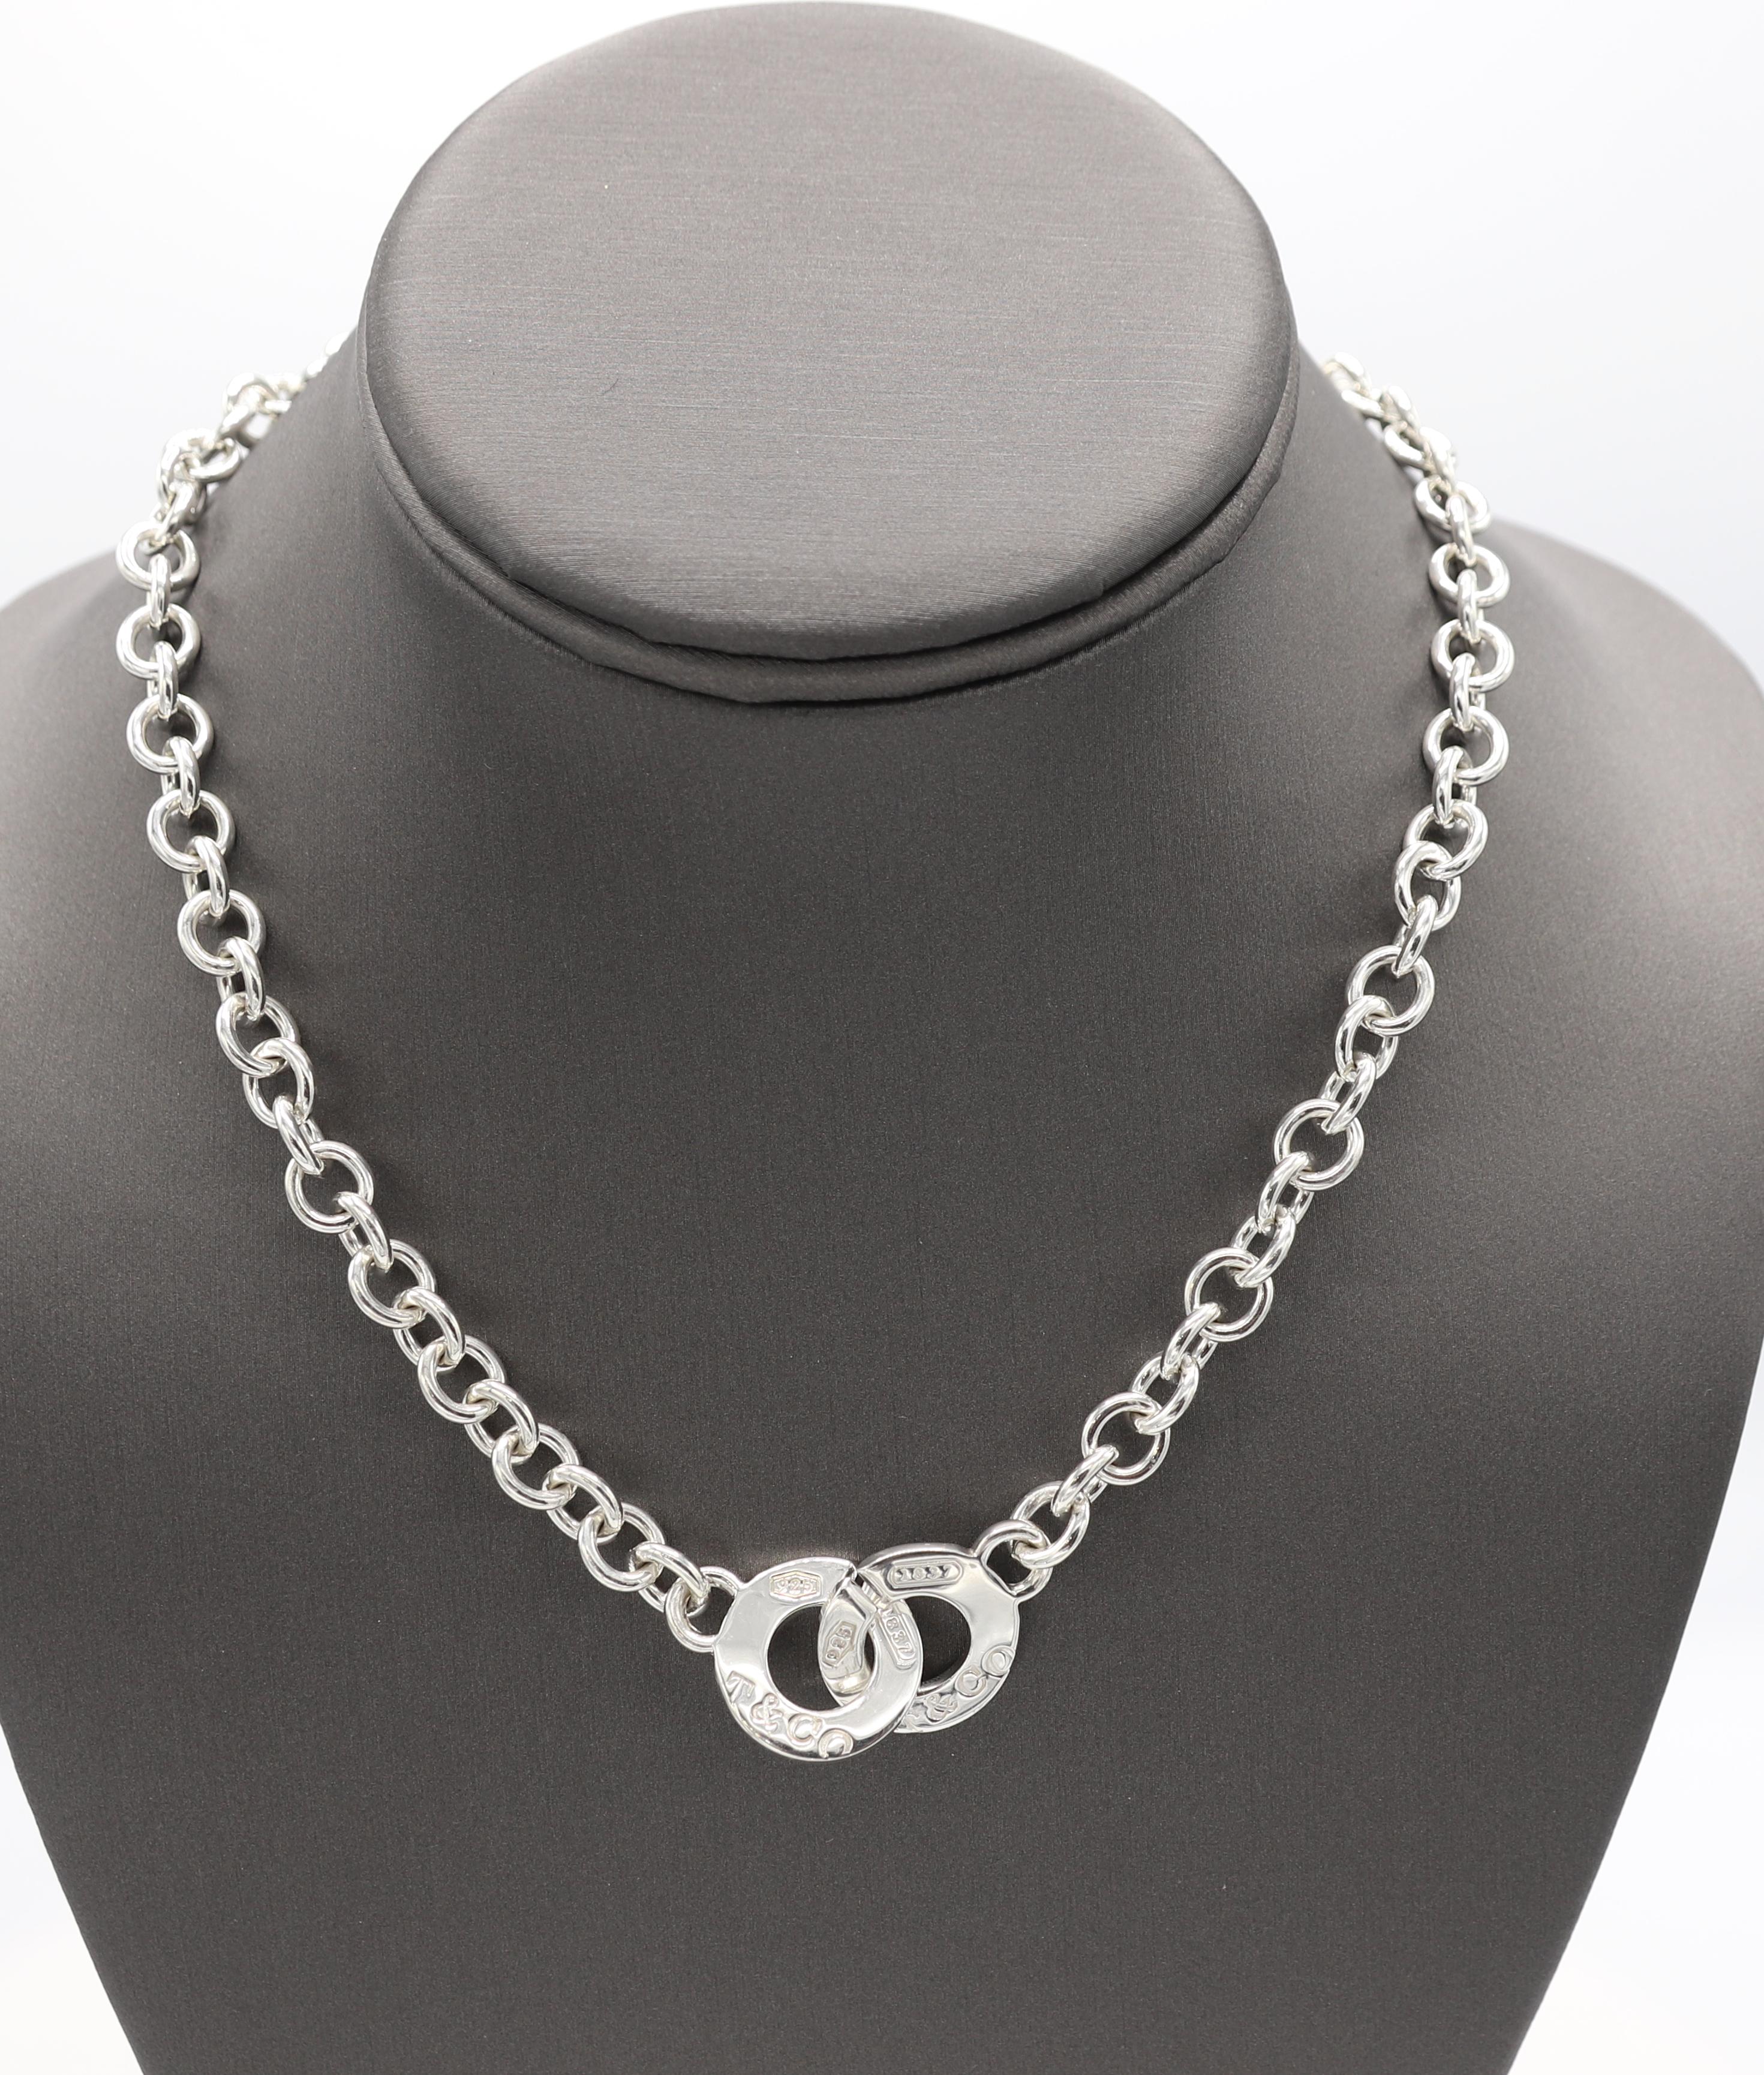 Tiffany & Co. Sterling Silver 1837 Interlocking Circle Chain Link Necklace 
Metal: Sterling silver
Weight: 45.64 grams
Length: 17.5 inches
Links: 8 x 7.5mm
Circle clasps: 18mm diameter
